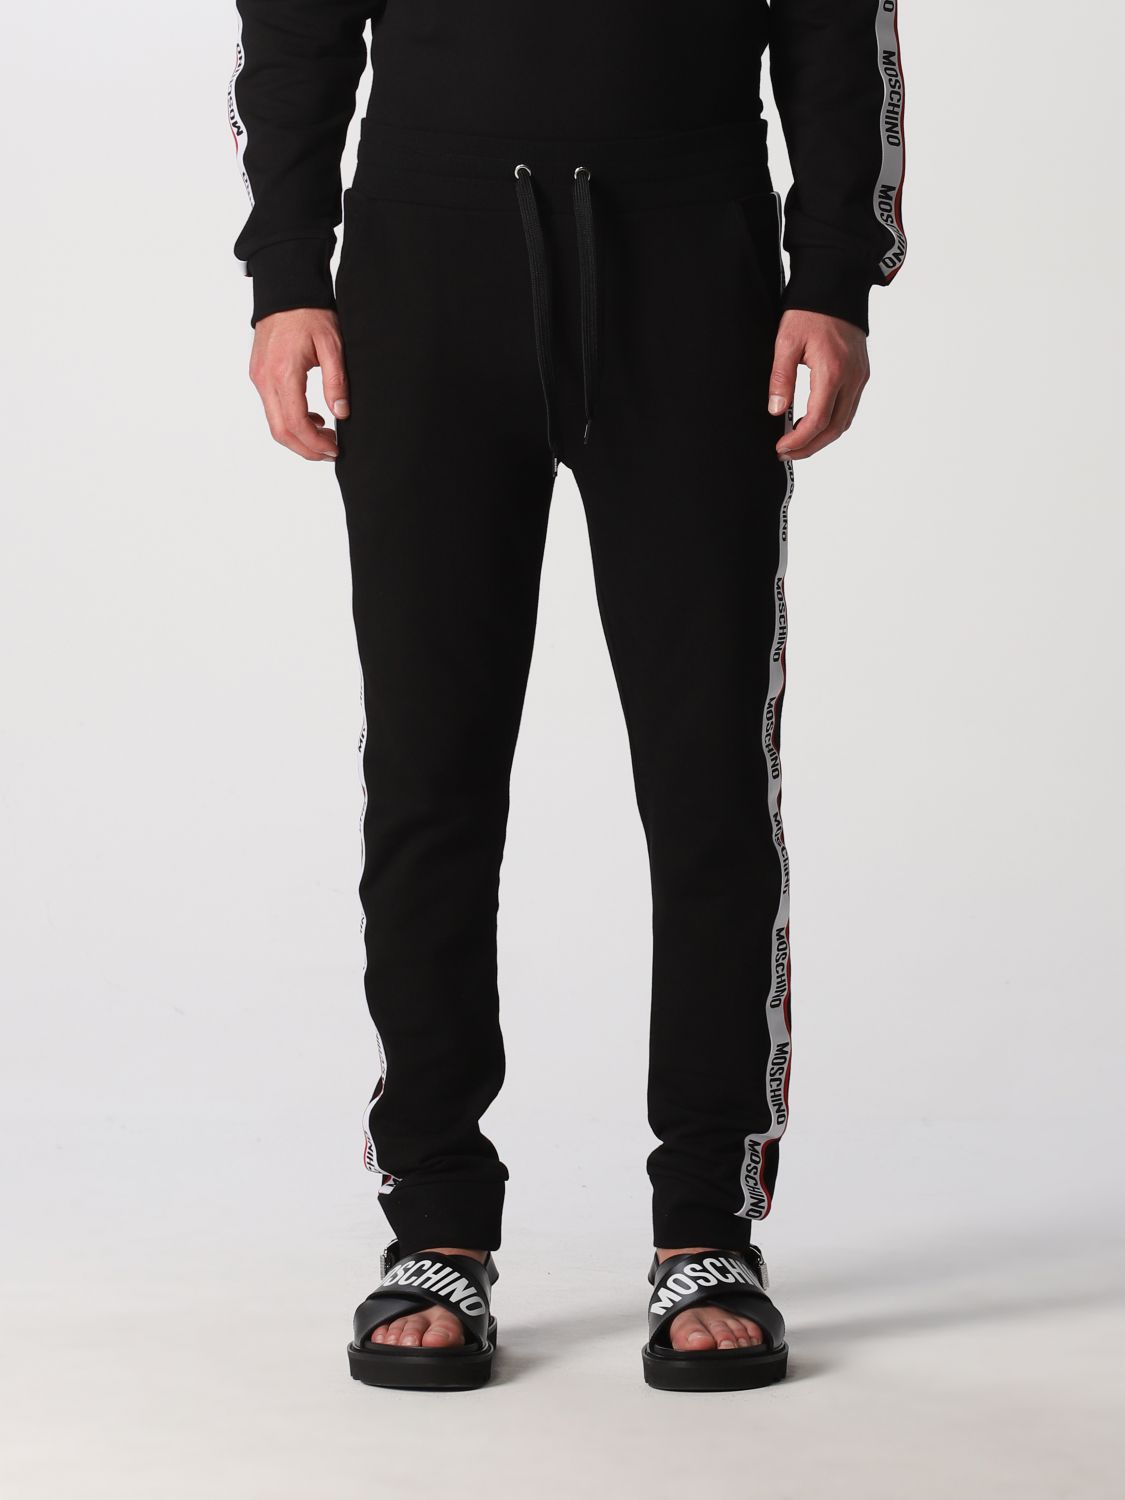 MOSCHINO COUTURE: men jogging pants - Black | Moschino Couture pants ...